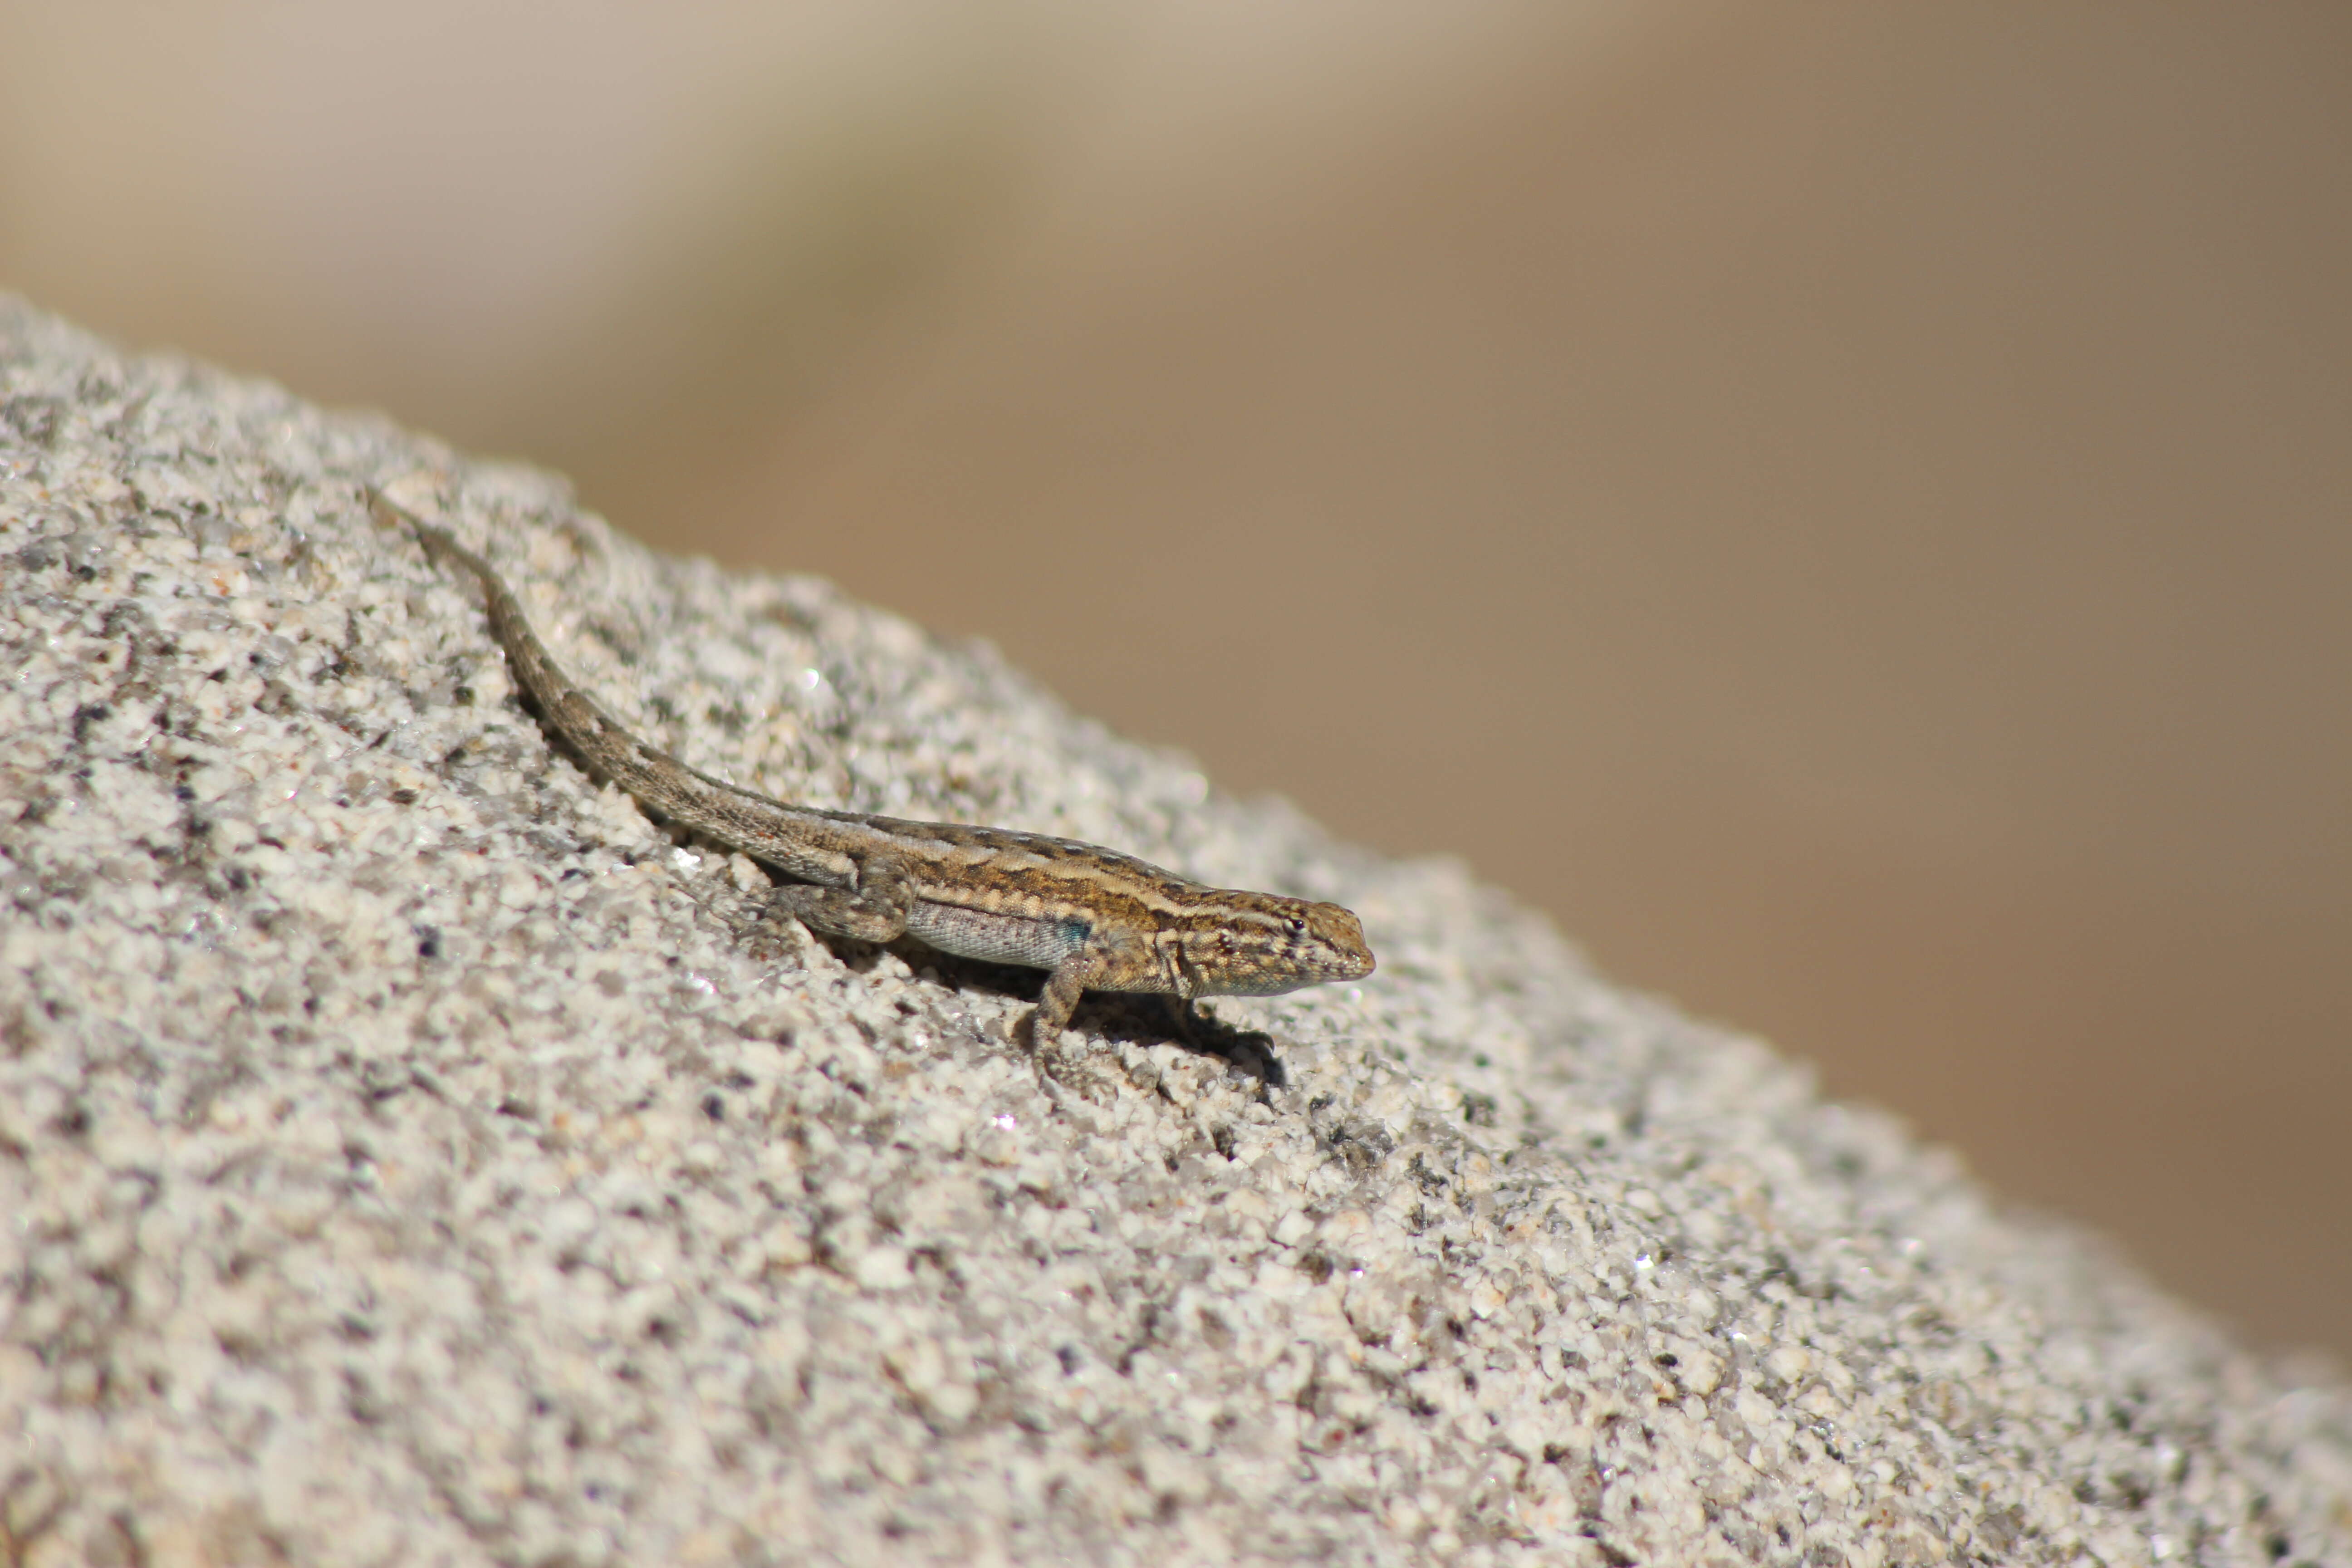 Image of common side-blotched lizard